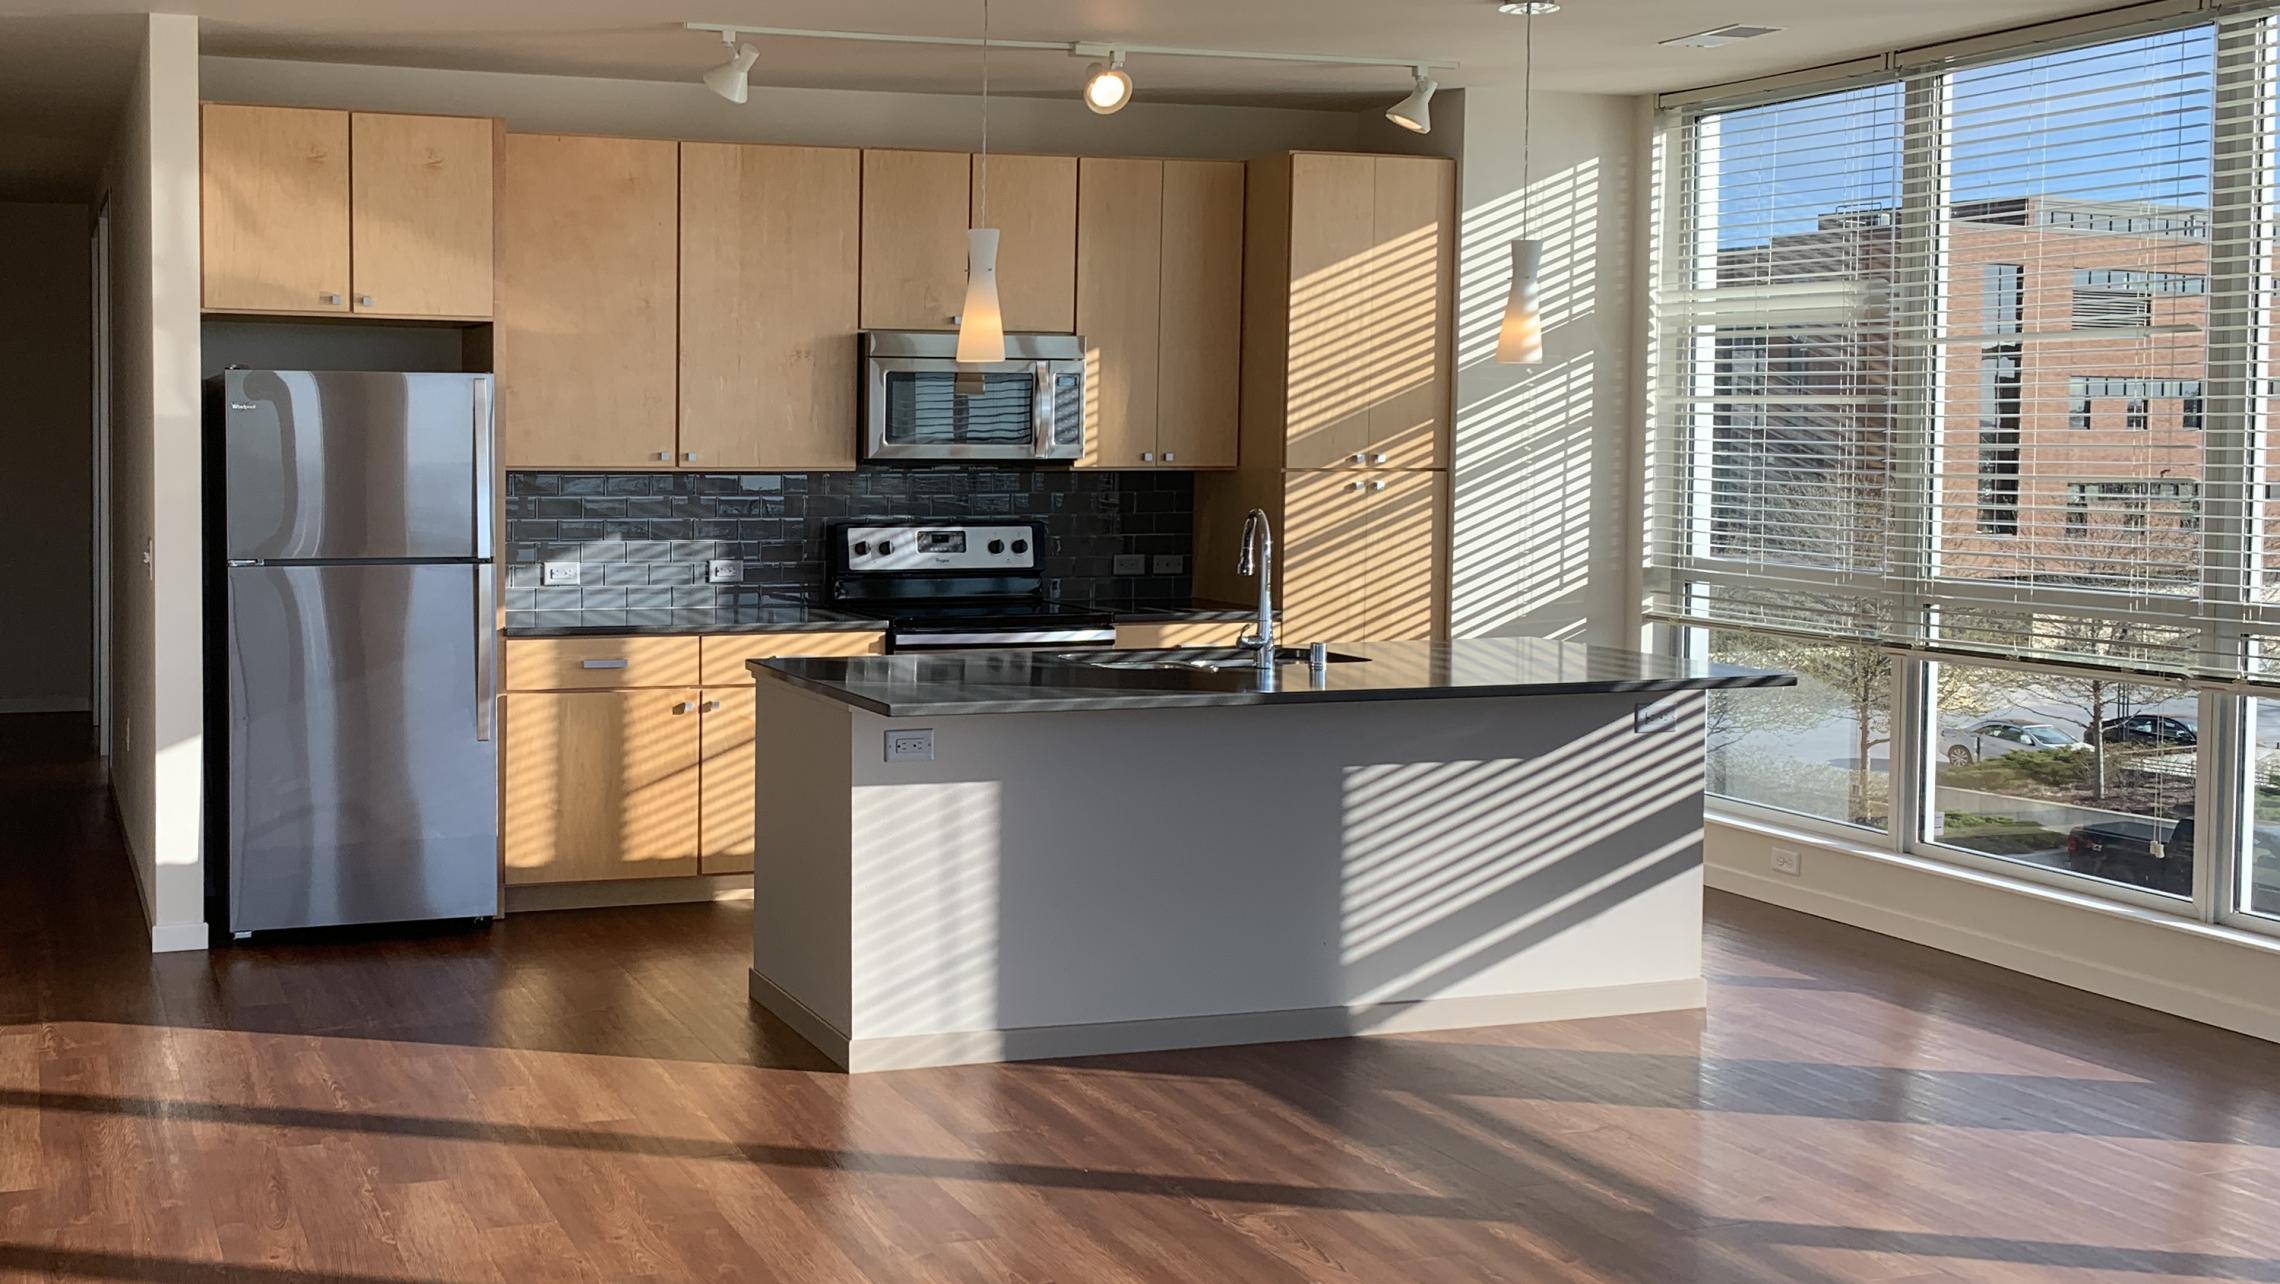 Nine-Line-at-The-Yards-Apartment-325-Three-Bedroom-Corner-Lake-View-Natural-Light-Sunny-Modern-Upscale-Designe-Luxury-Luxurious-Balcony-Views-Fitness-Lounge-Courtyard-Dogs-Cats-Bike-Trail-Downtown-Capitol